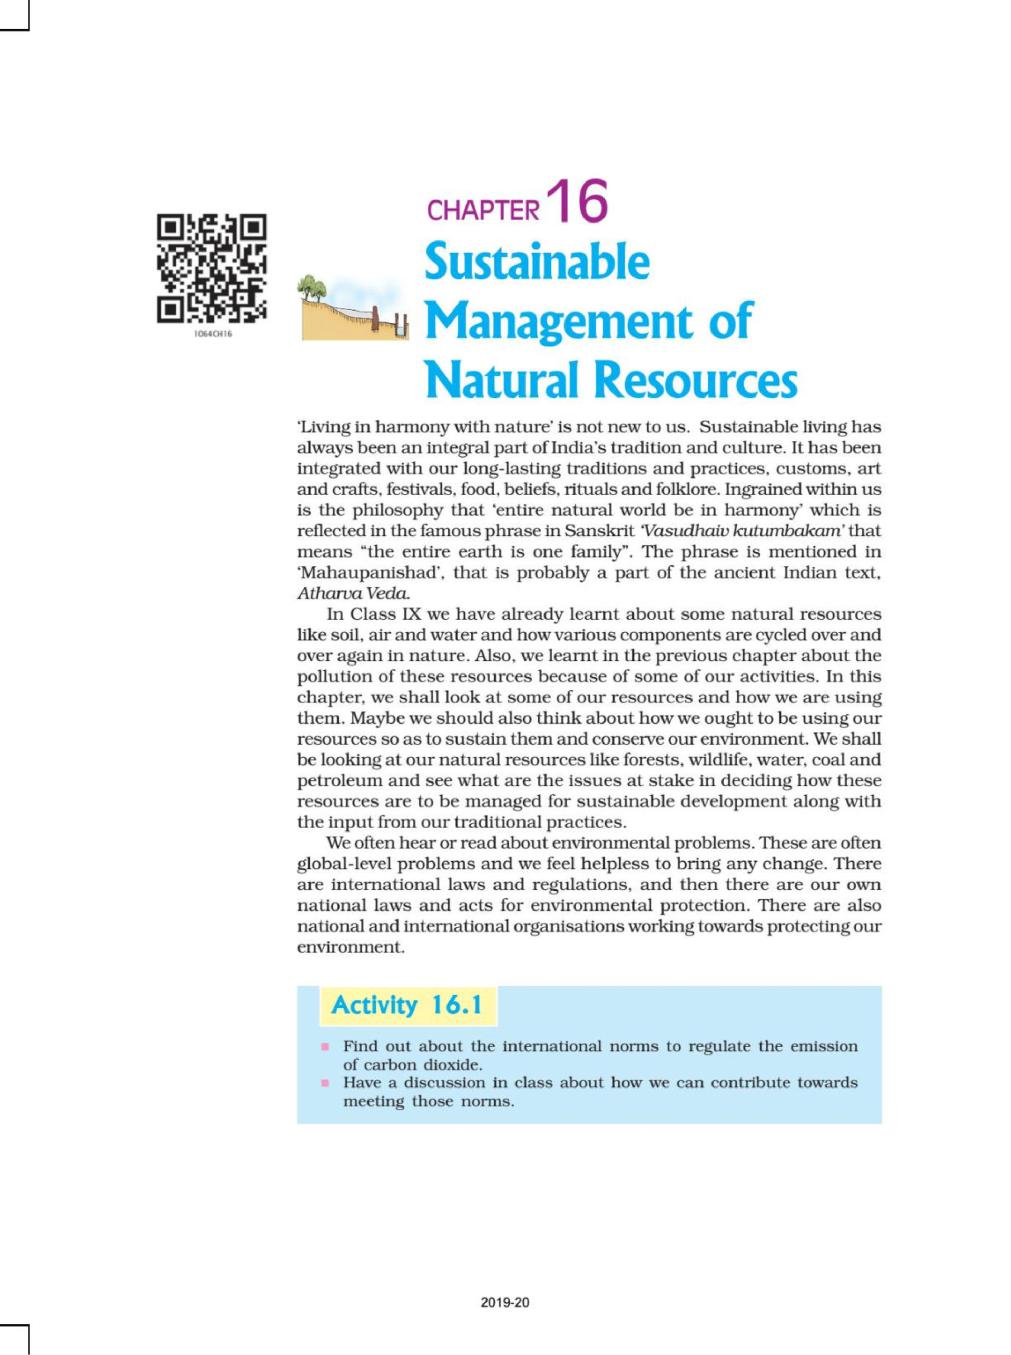 NCERT Book Class 10 Science Chapter 16 Sustainable Management of Natural Resources - Page 1